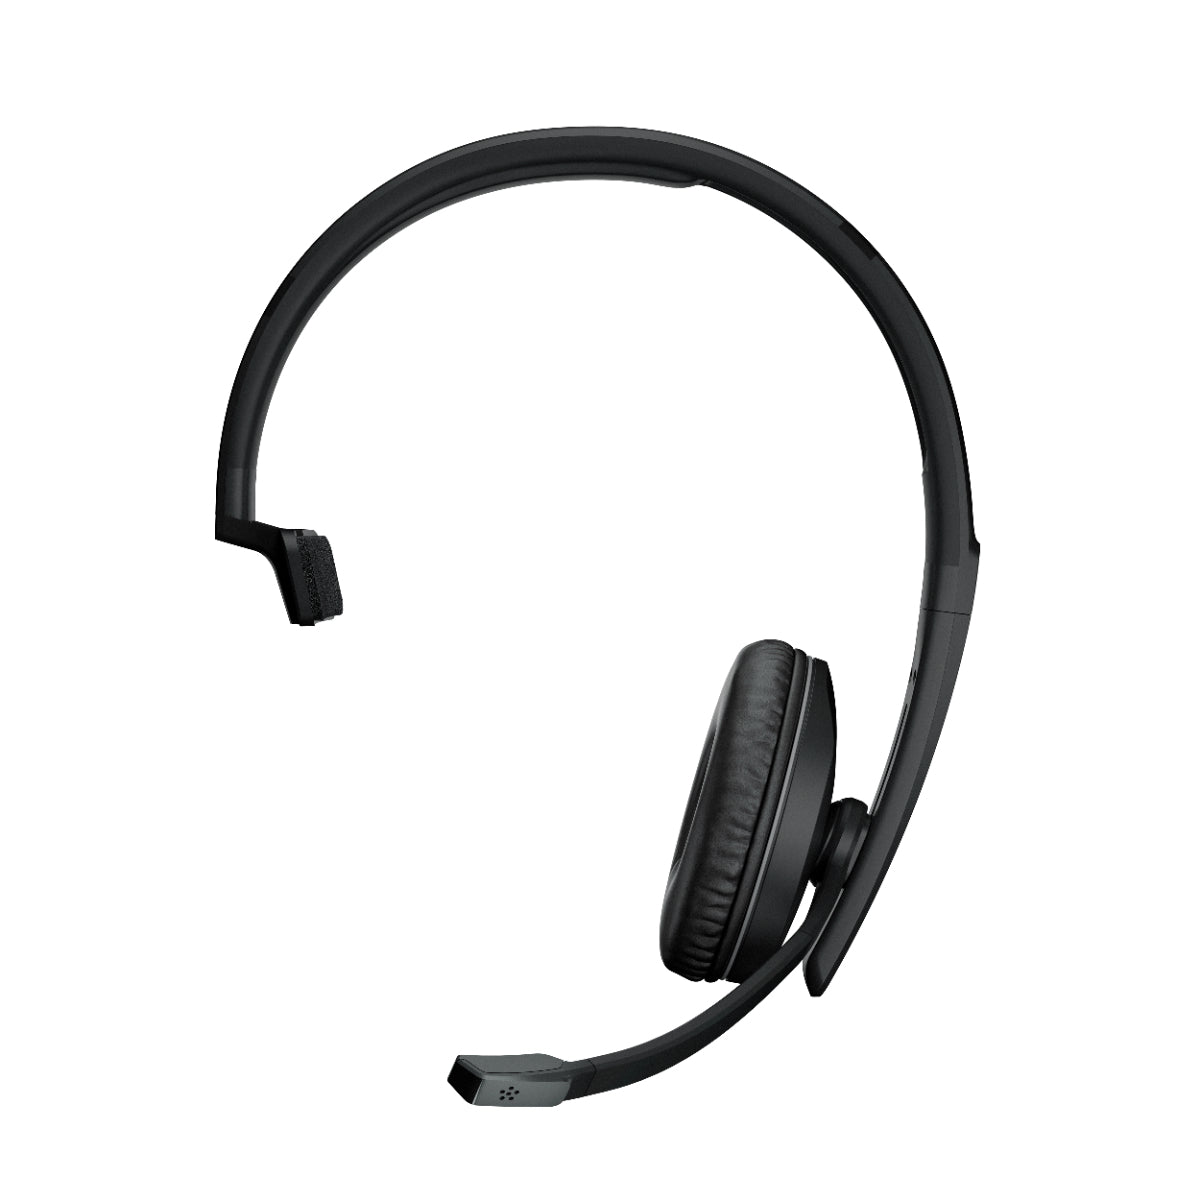 EPOS ADAPT 230 BT Monaural Headset, On-ear, MS Teams Certified, With Dongle & Case